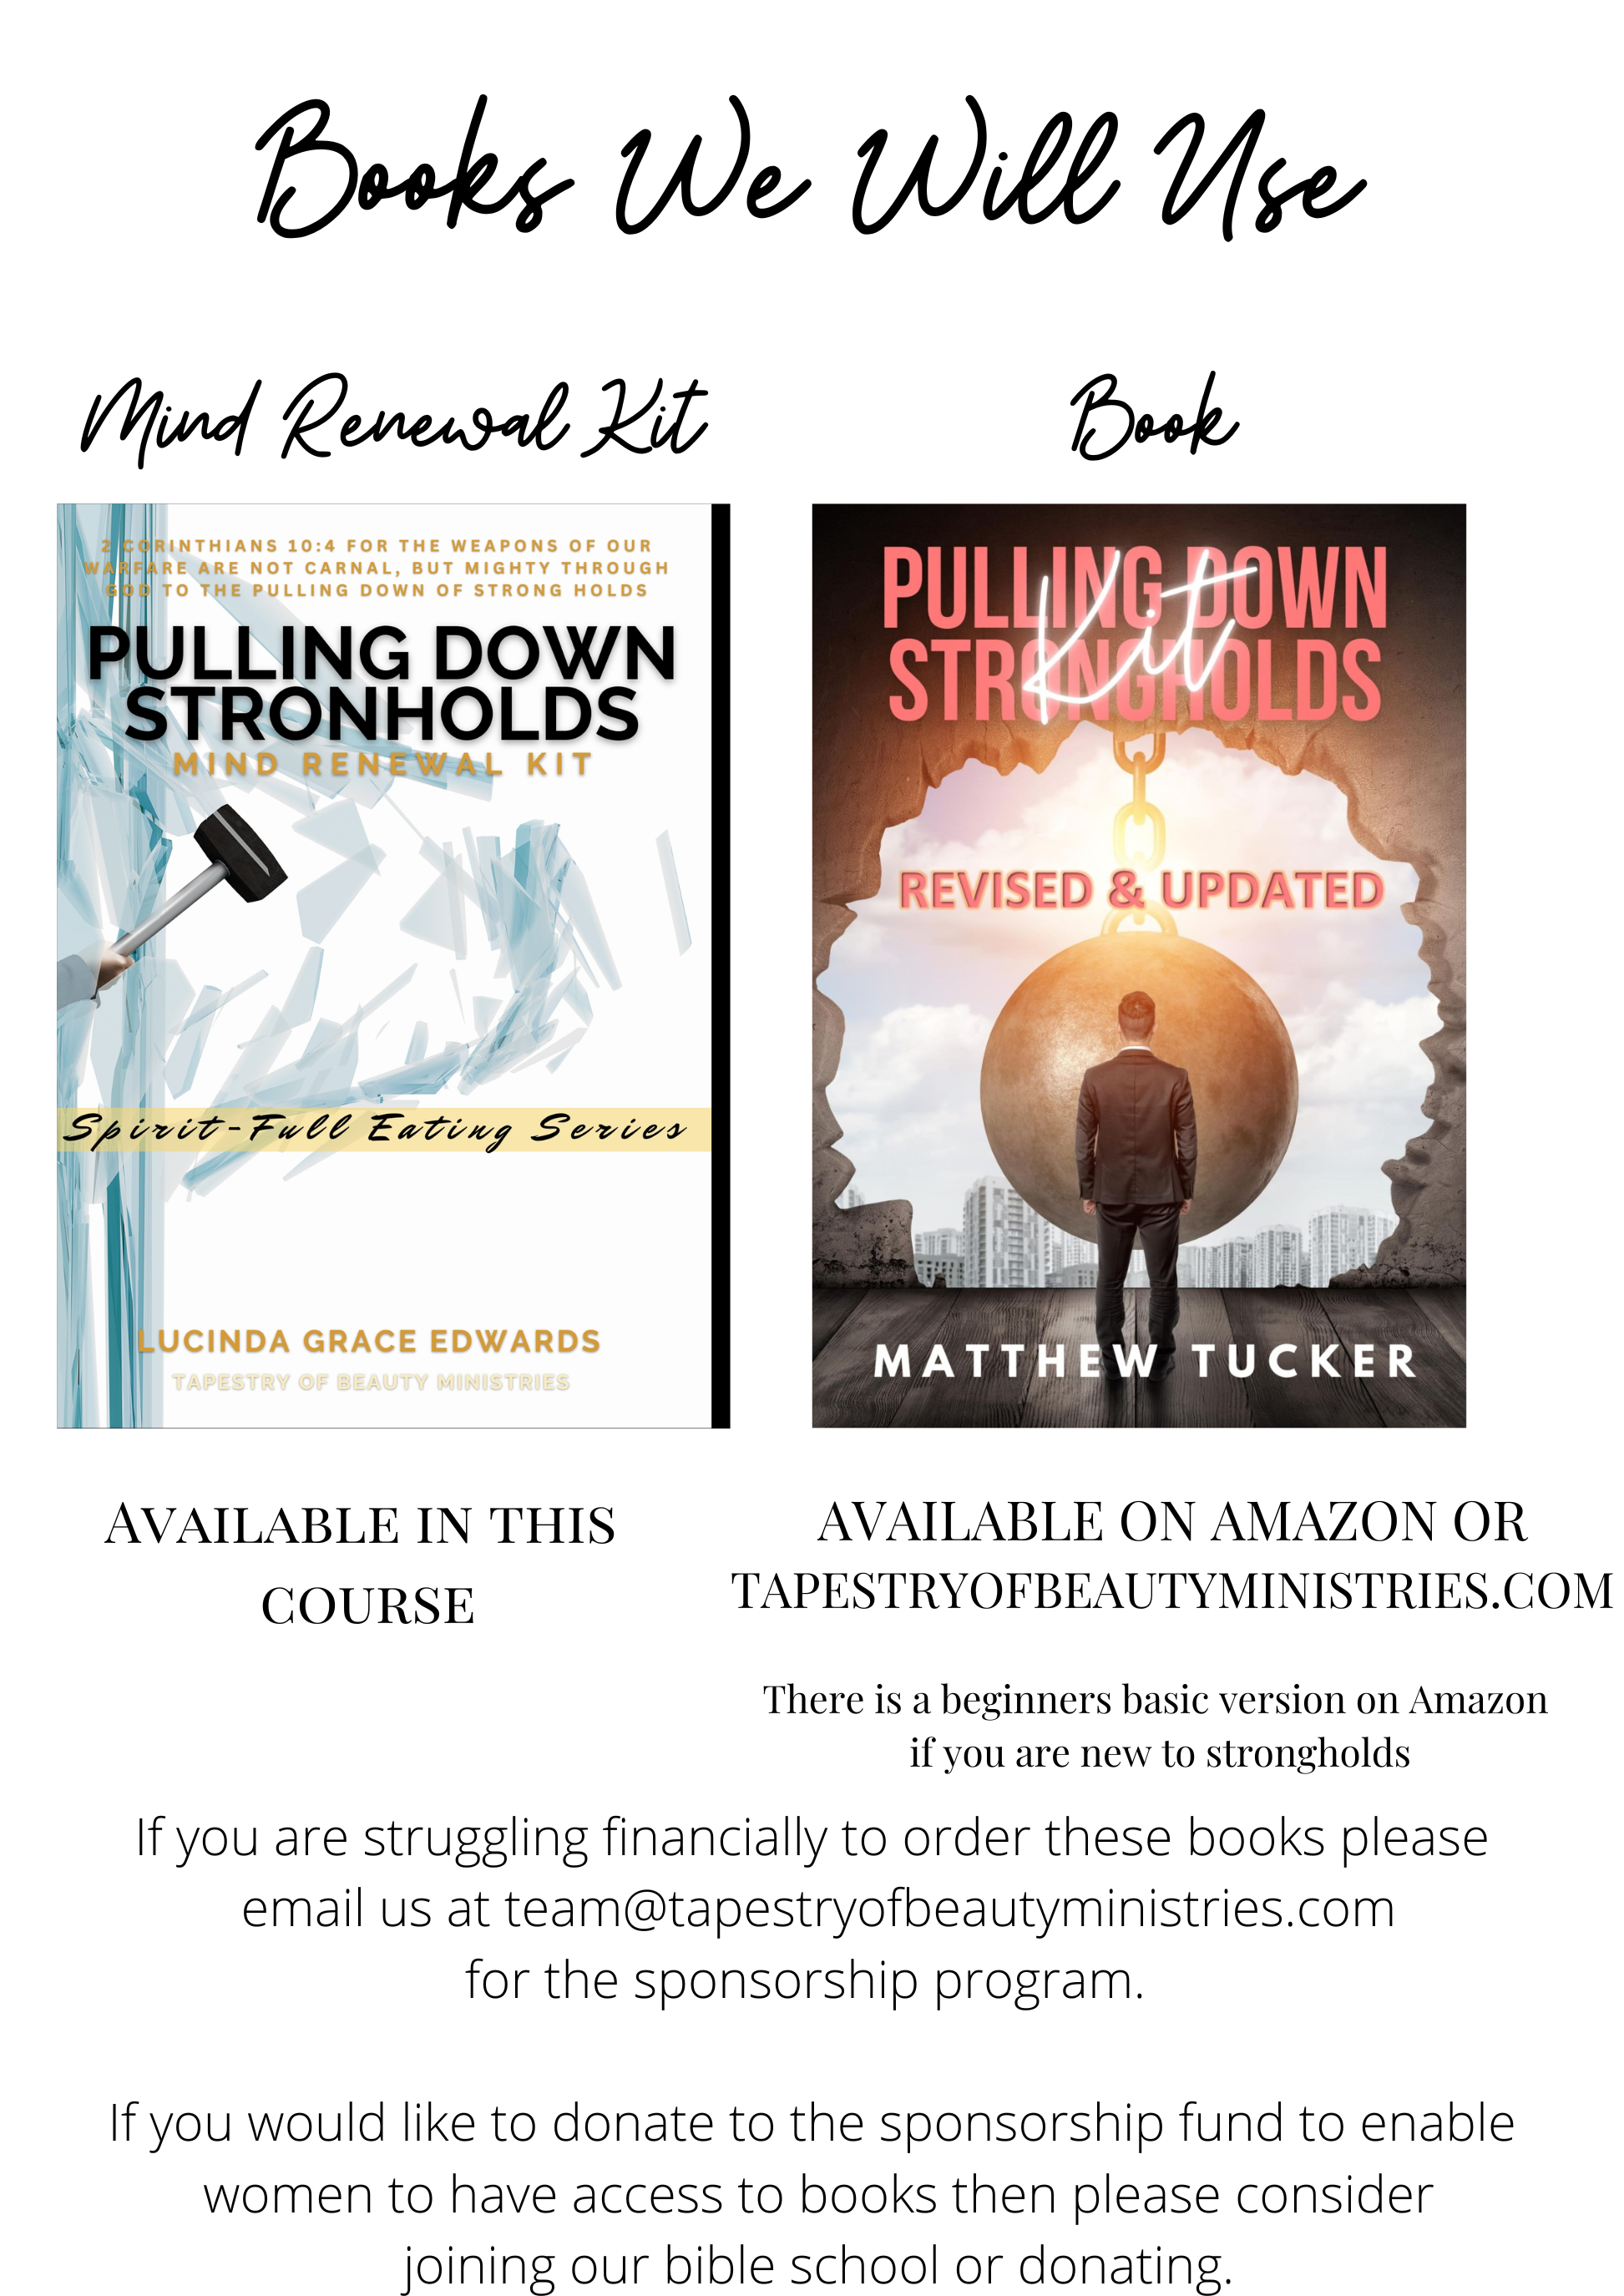 Pulling Down Strongholds, Matthew Tucker, Tapestry Of Beauty Ministries